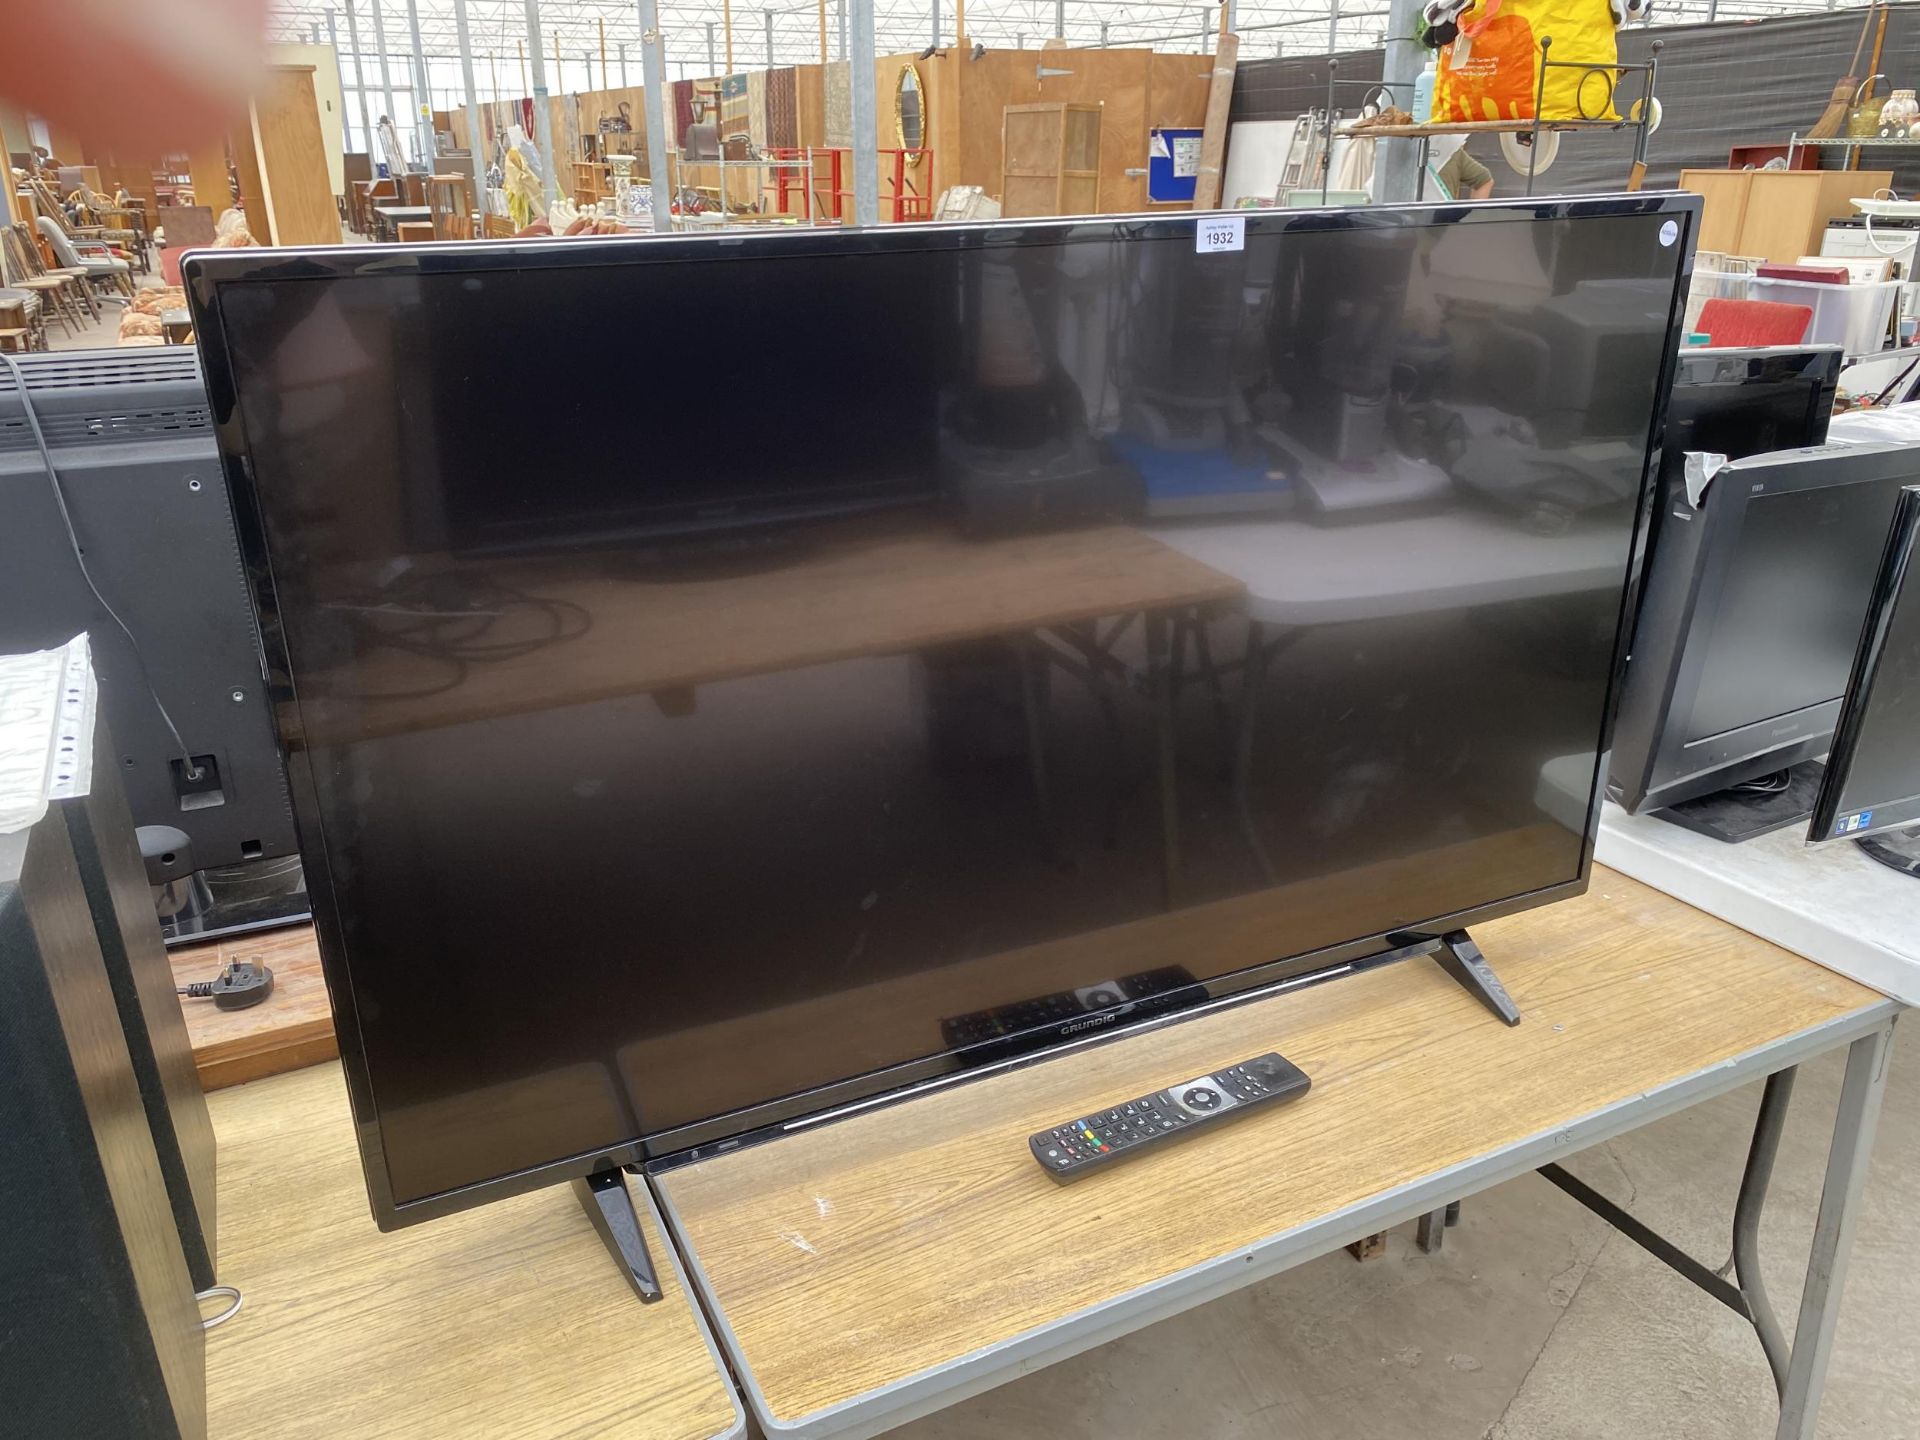 A 49" GRUNDIG FLATSCREEN TELEVISION WITH REMOTE BELIEVED IN WORKING ORDER BUT NO WARRANTY